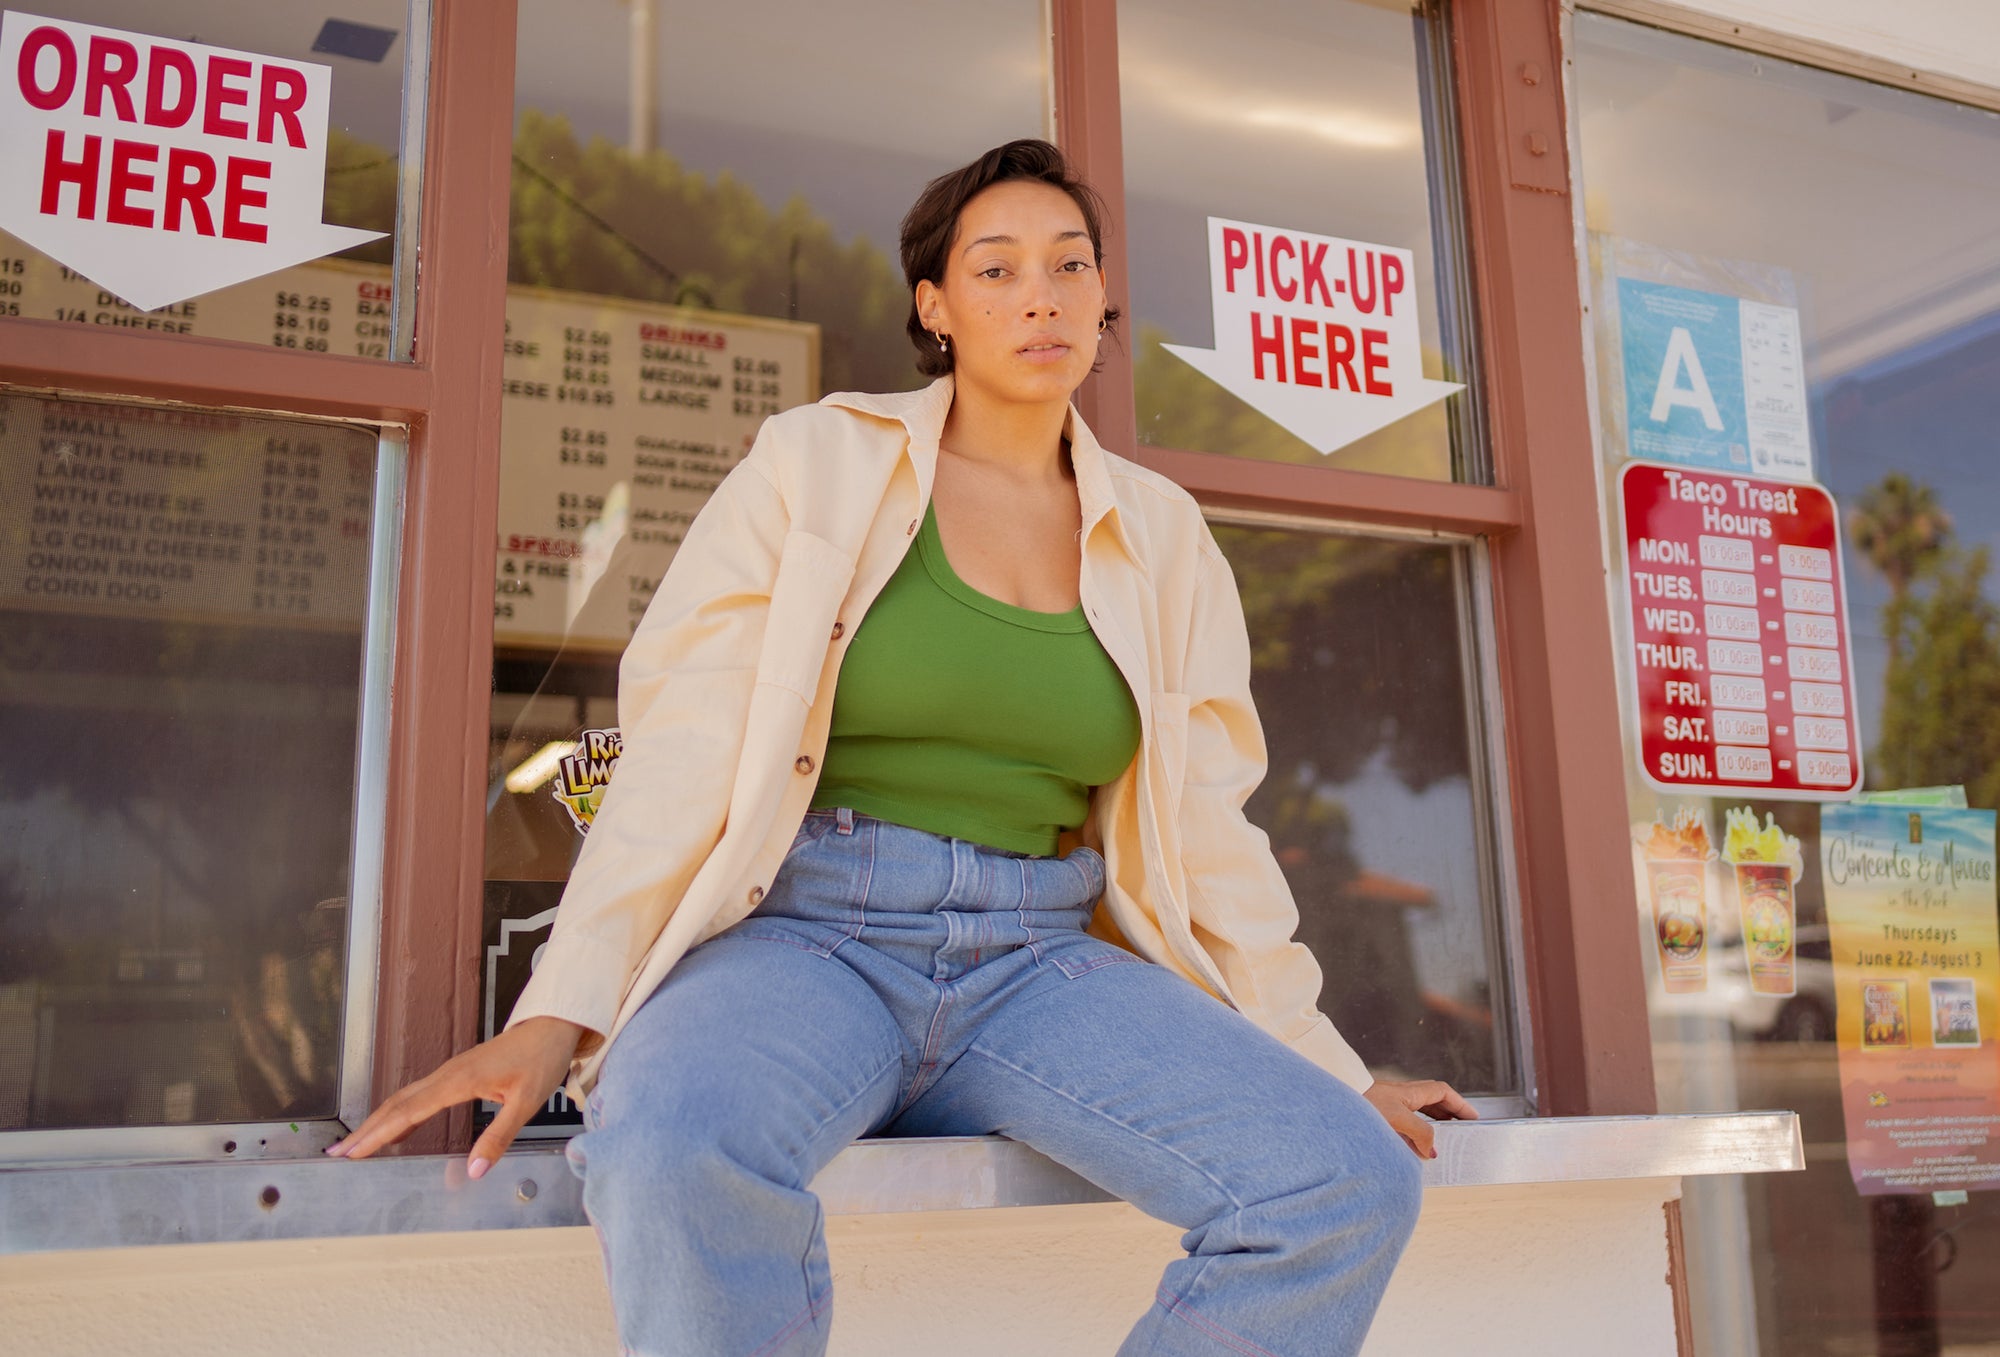 Tiara is wearing Oversize Overshirt in Vintage Off-White, Cropped Tank Top in Lawn Green, and Carpenter Jeans in Light Wash